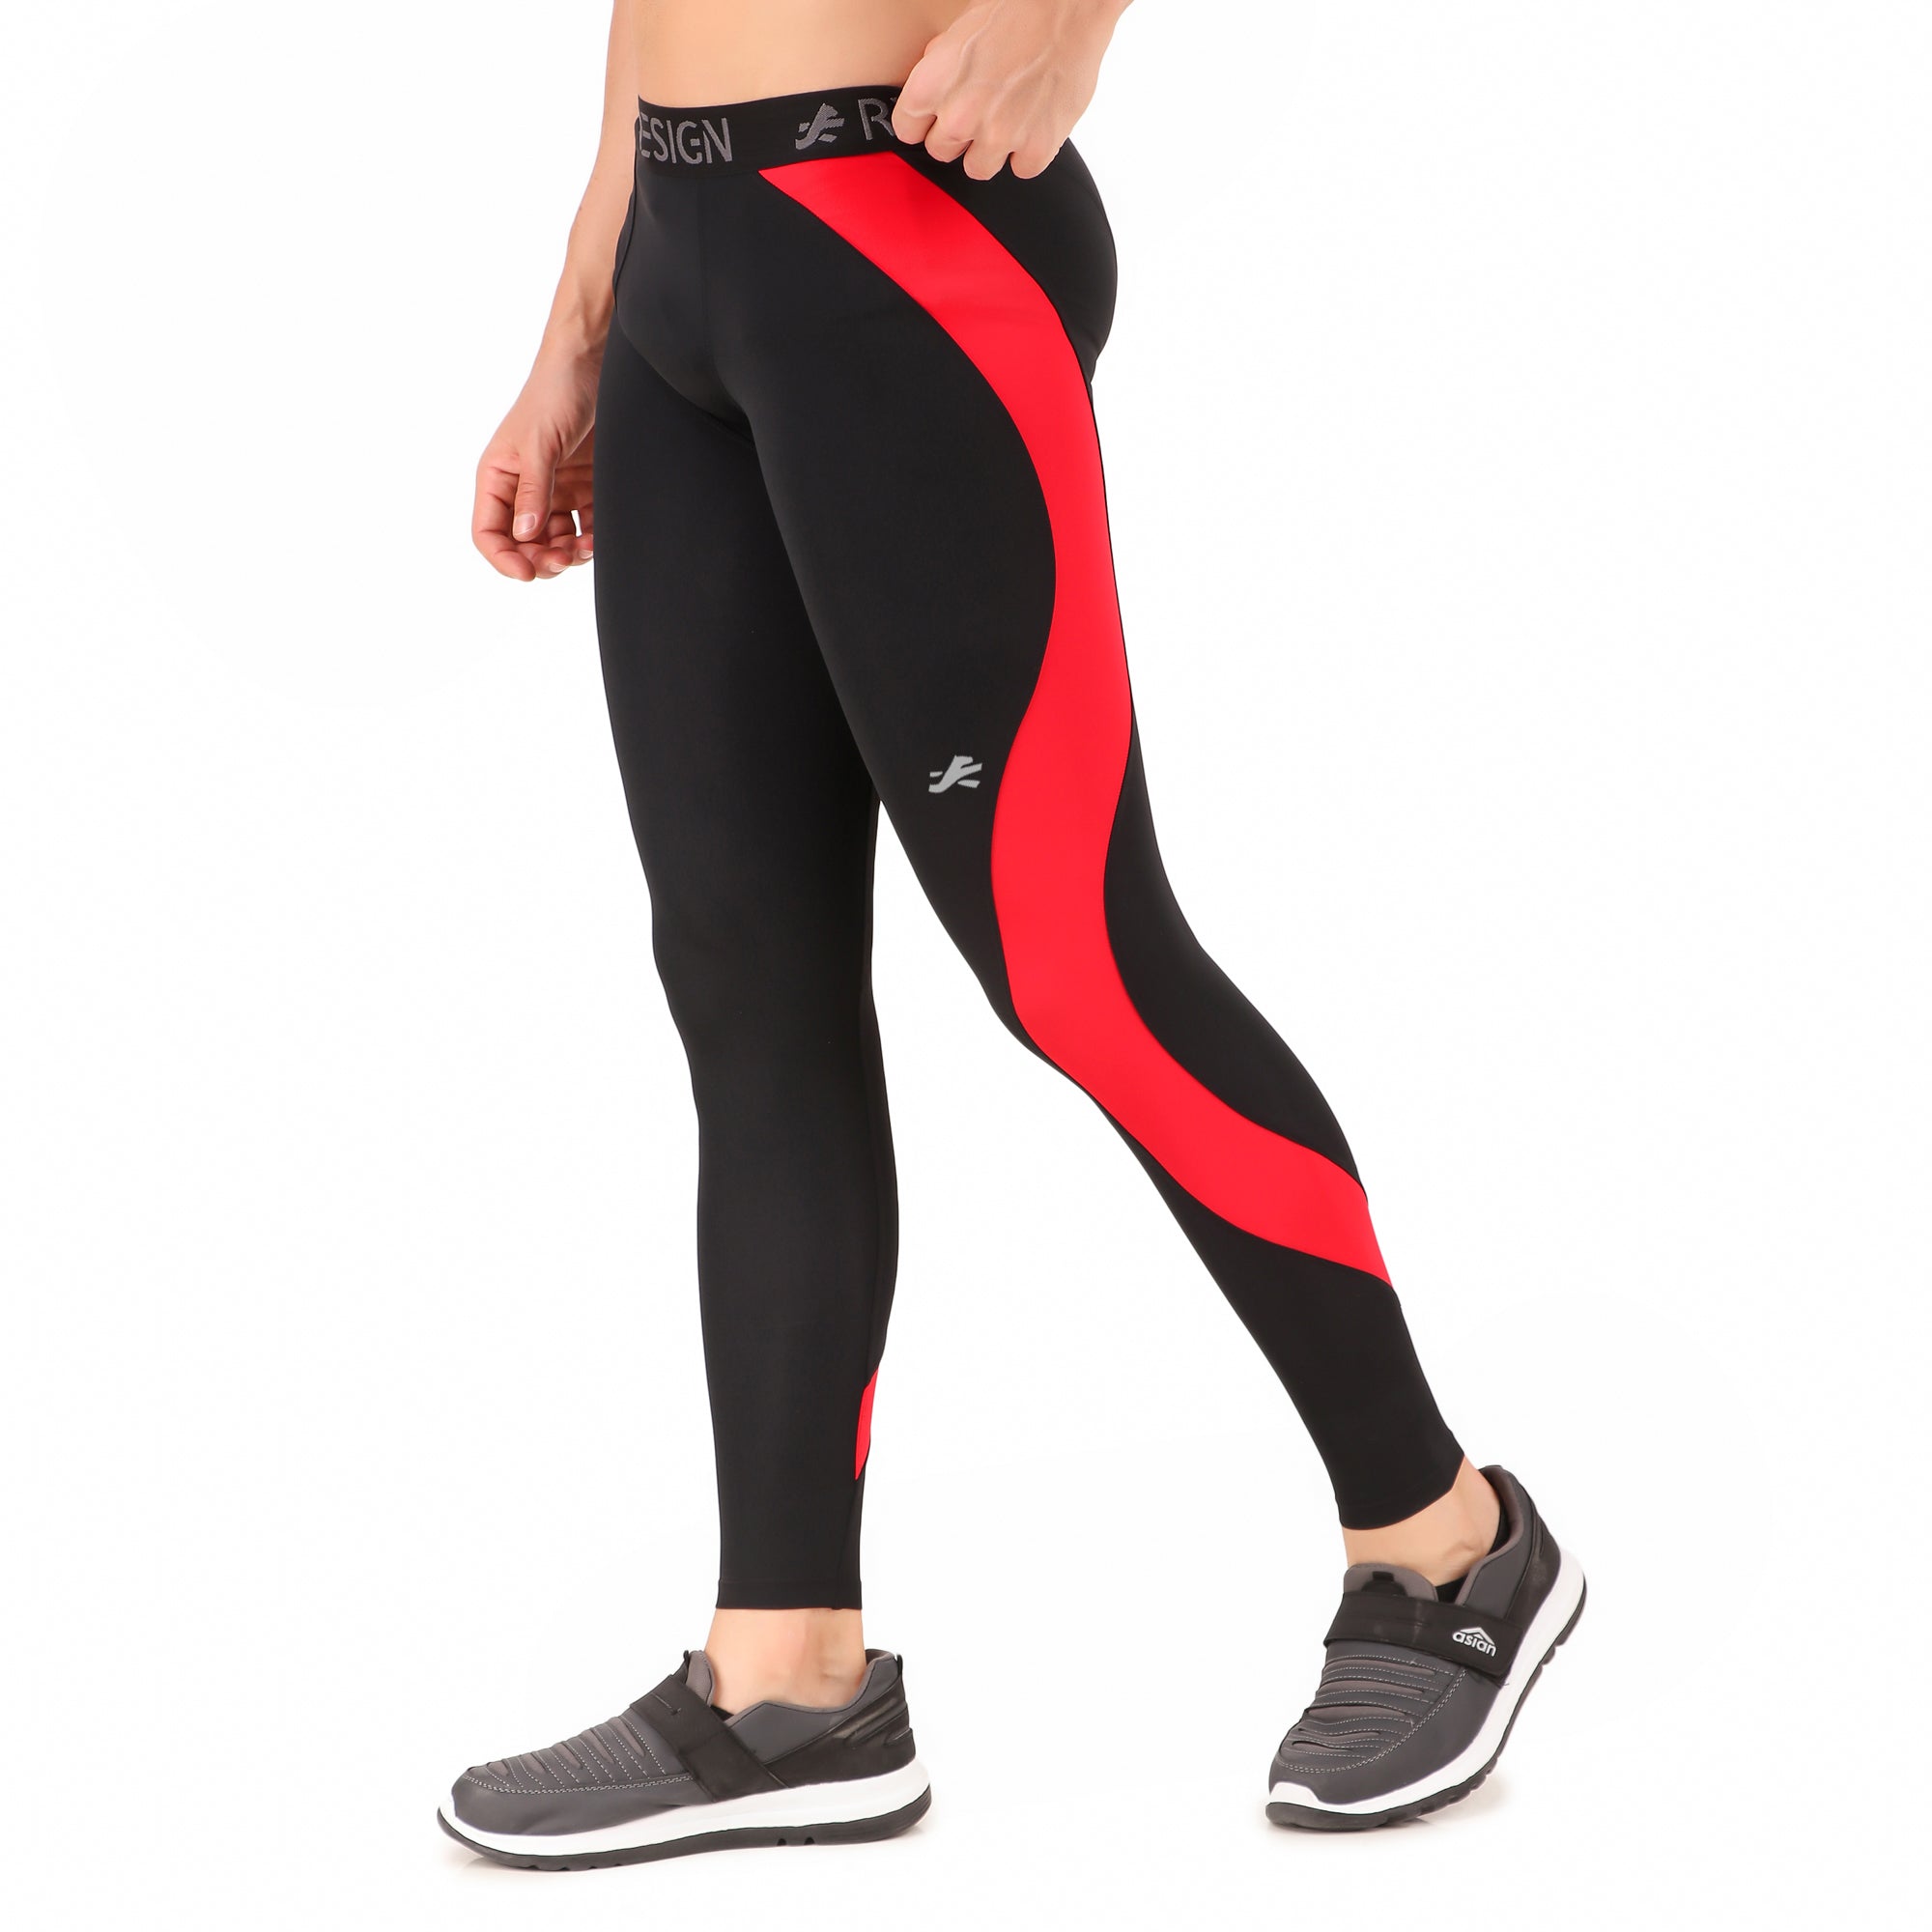 Men's Compression Pants Cool Dry Athletic India